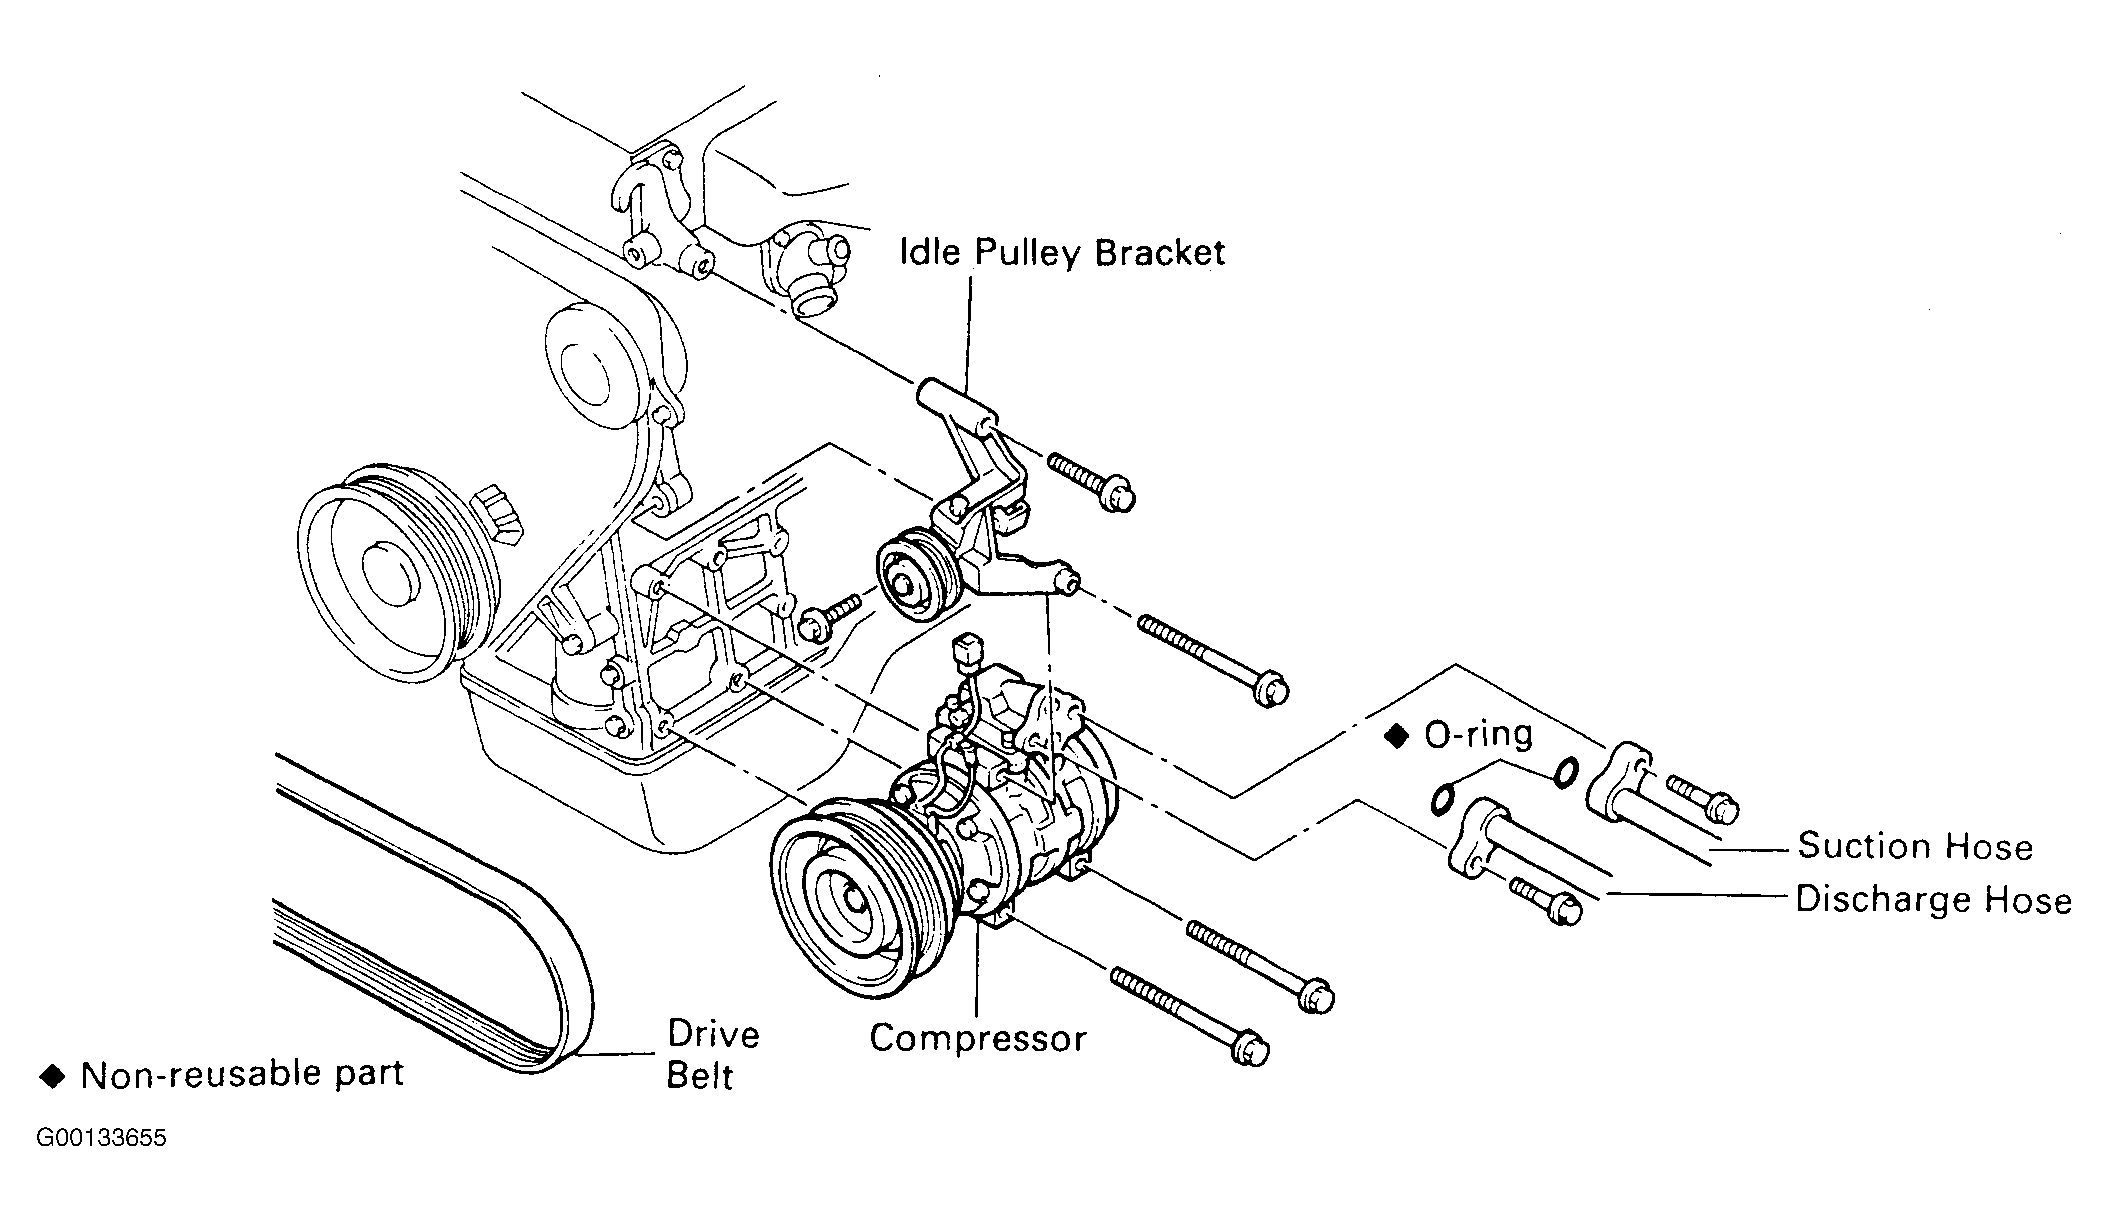 1995 Toyota Corolla Serpentine Belt Routing and Timing Belt Diagrams